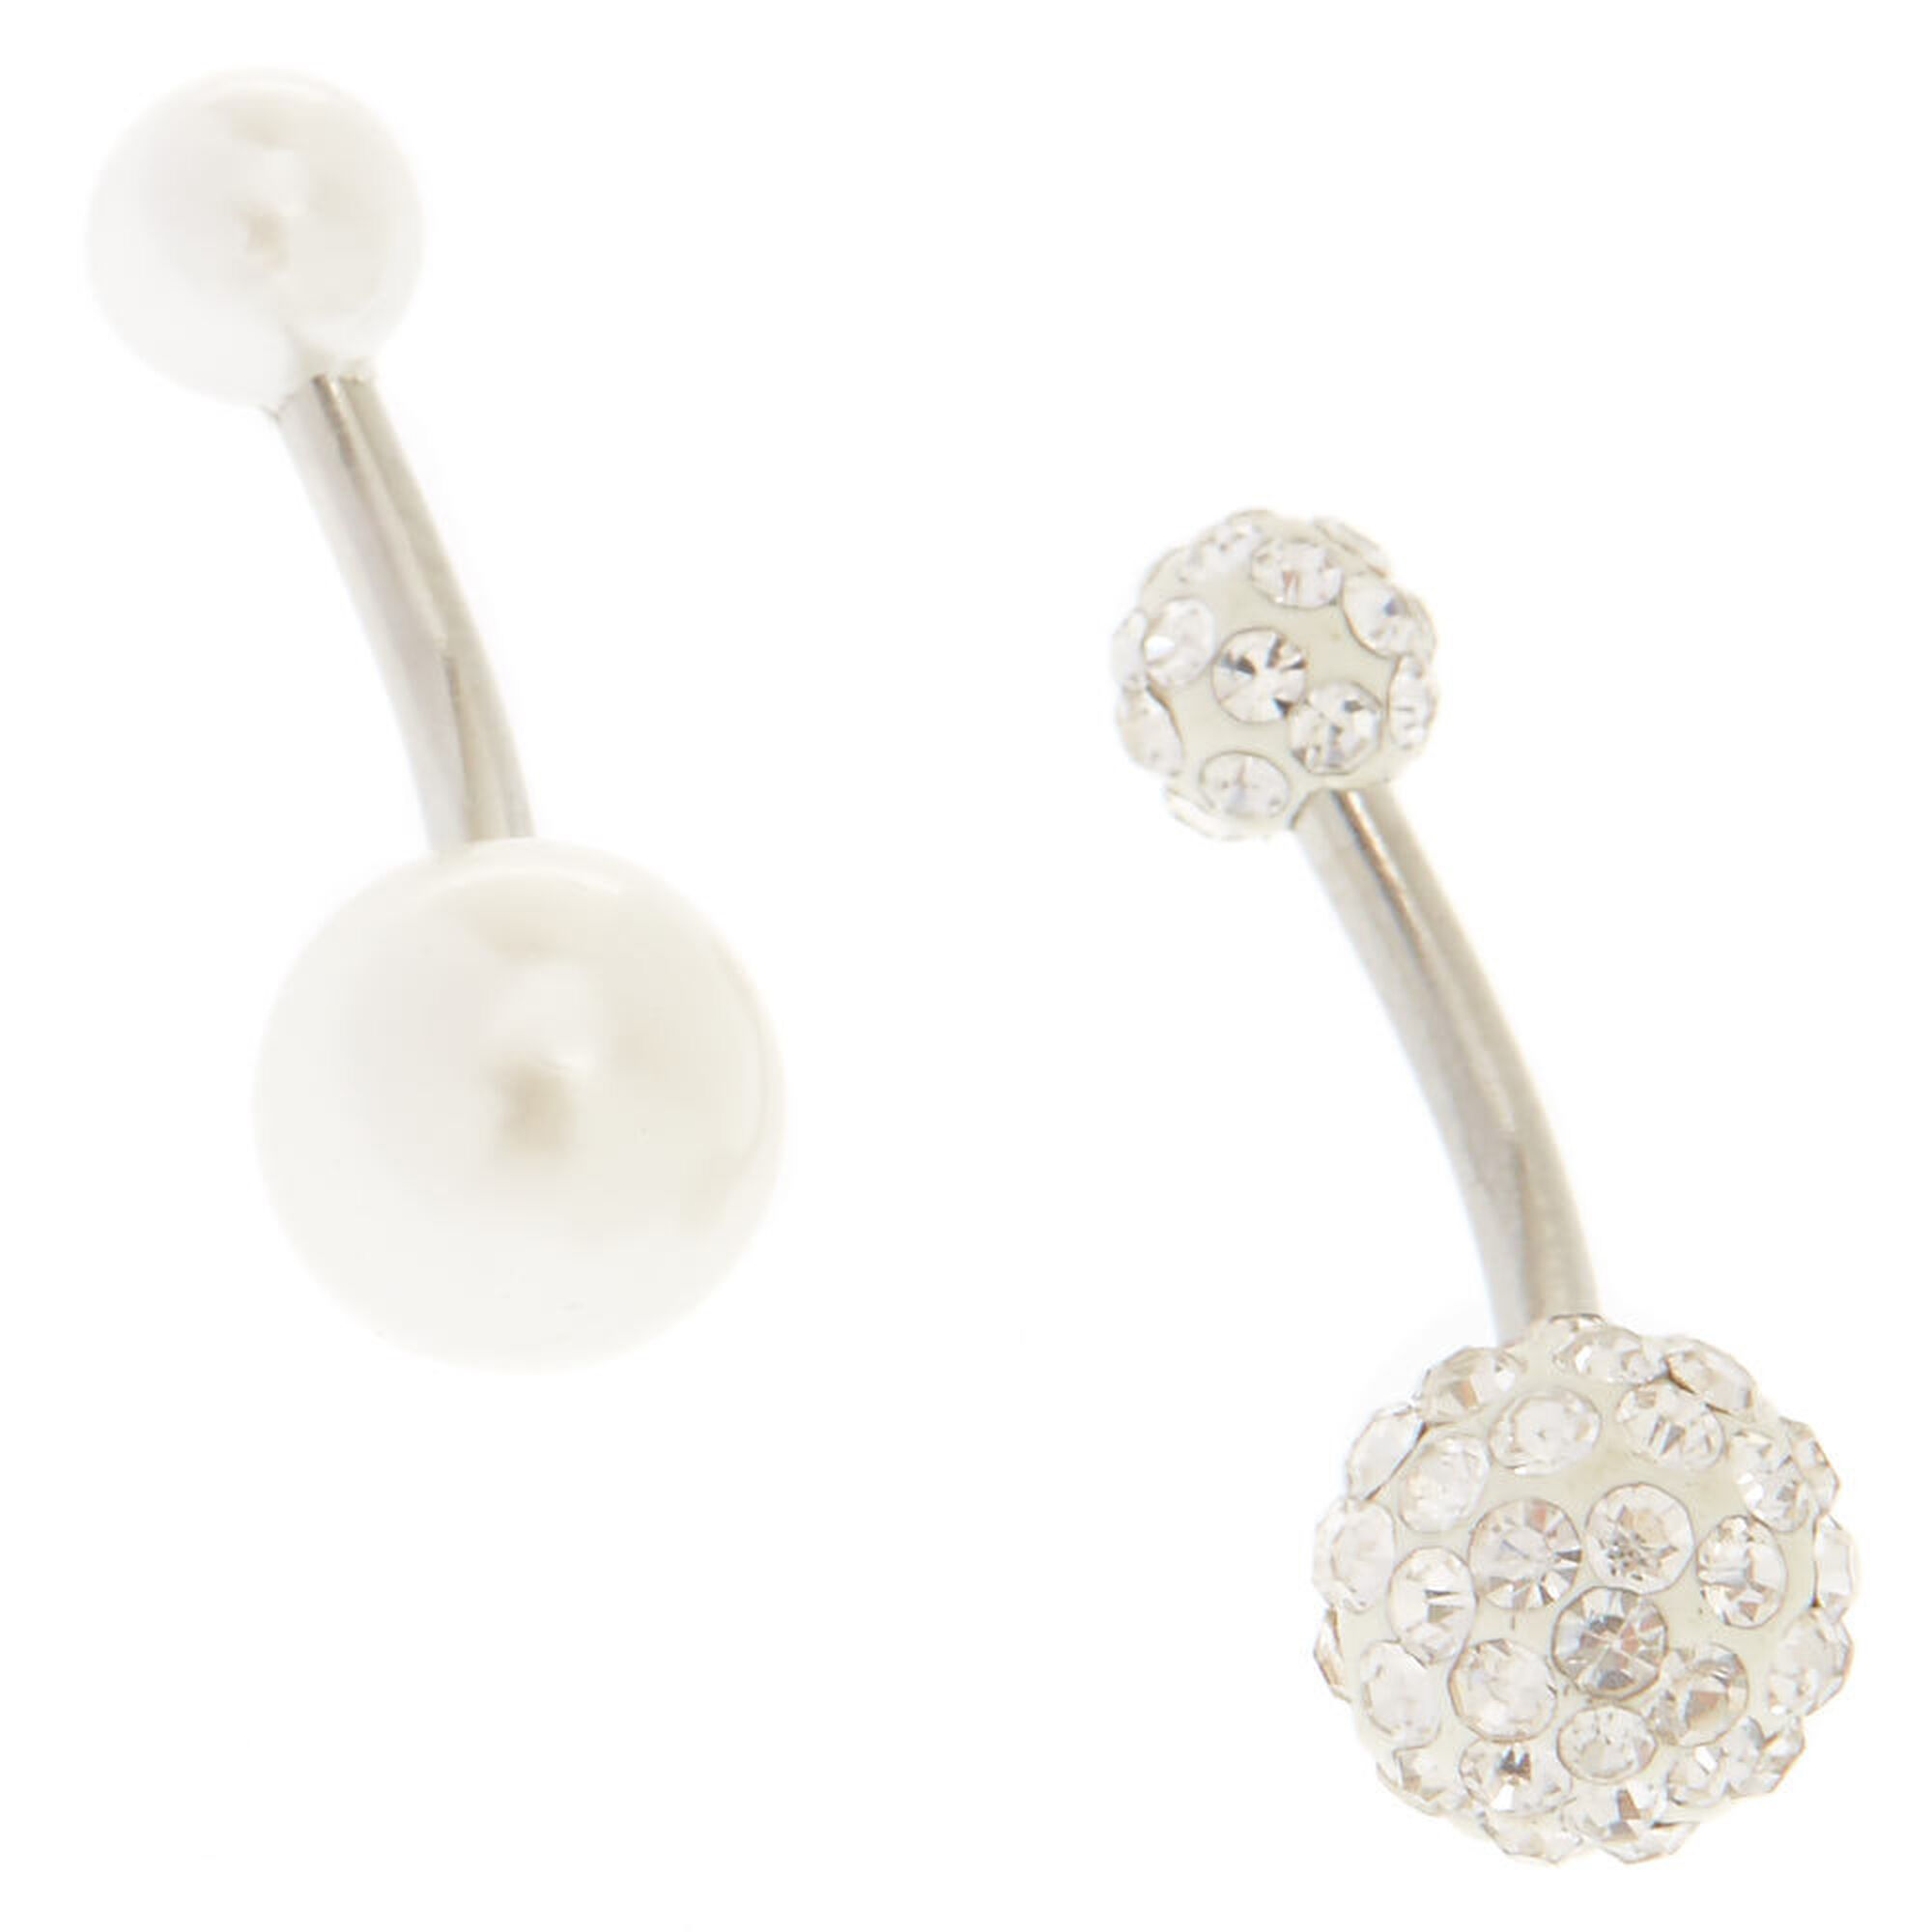 View Claires Tone Pearl Fireball Crystal Belly Rings 2 Pack Silver information